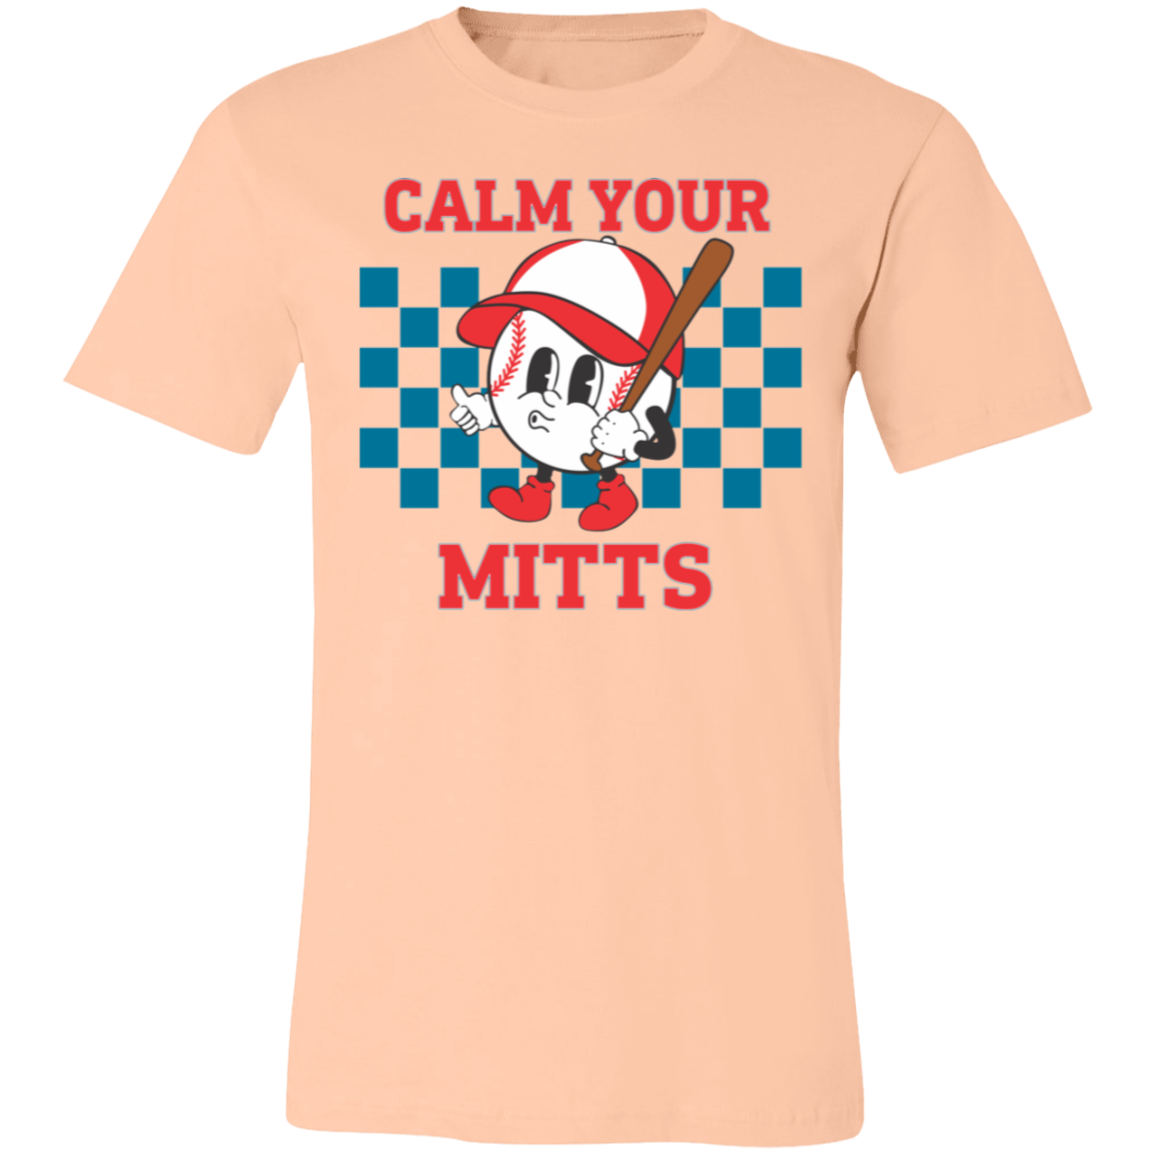 Call Your Mitts Premium Women's Tee - Game Day Getup